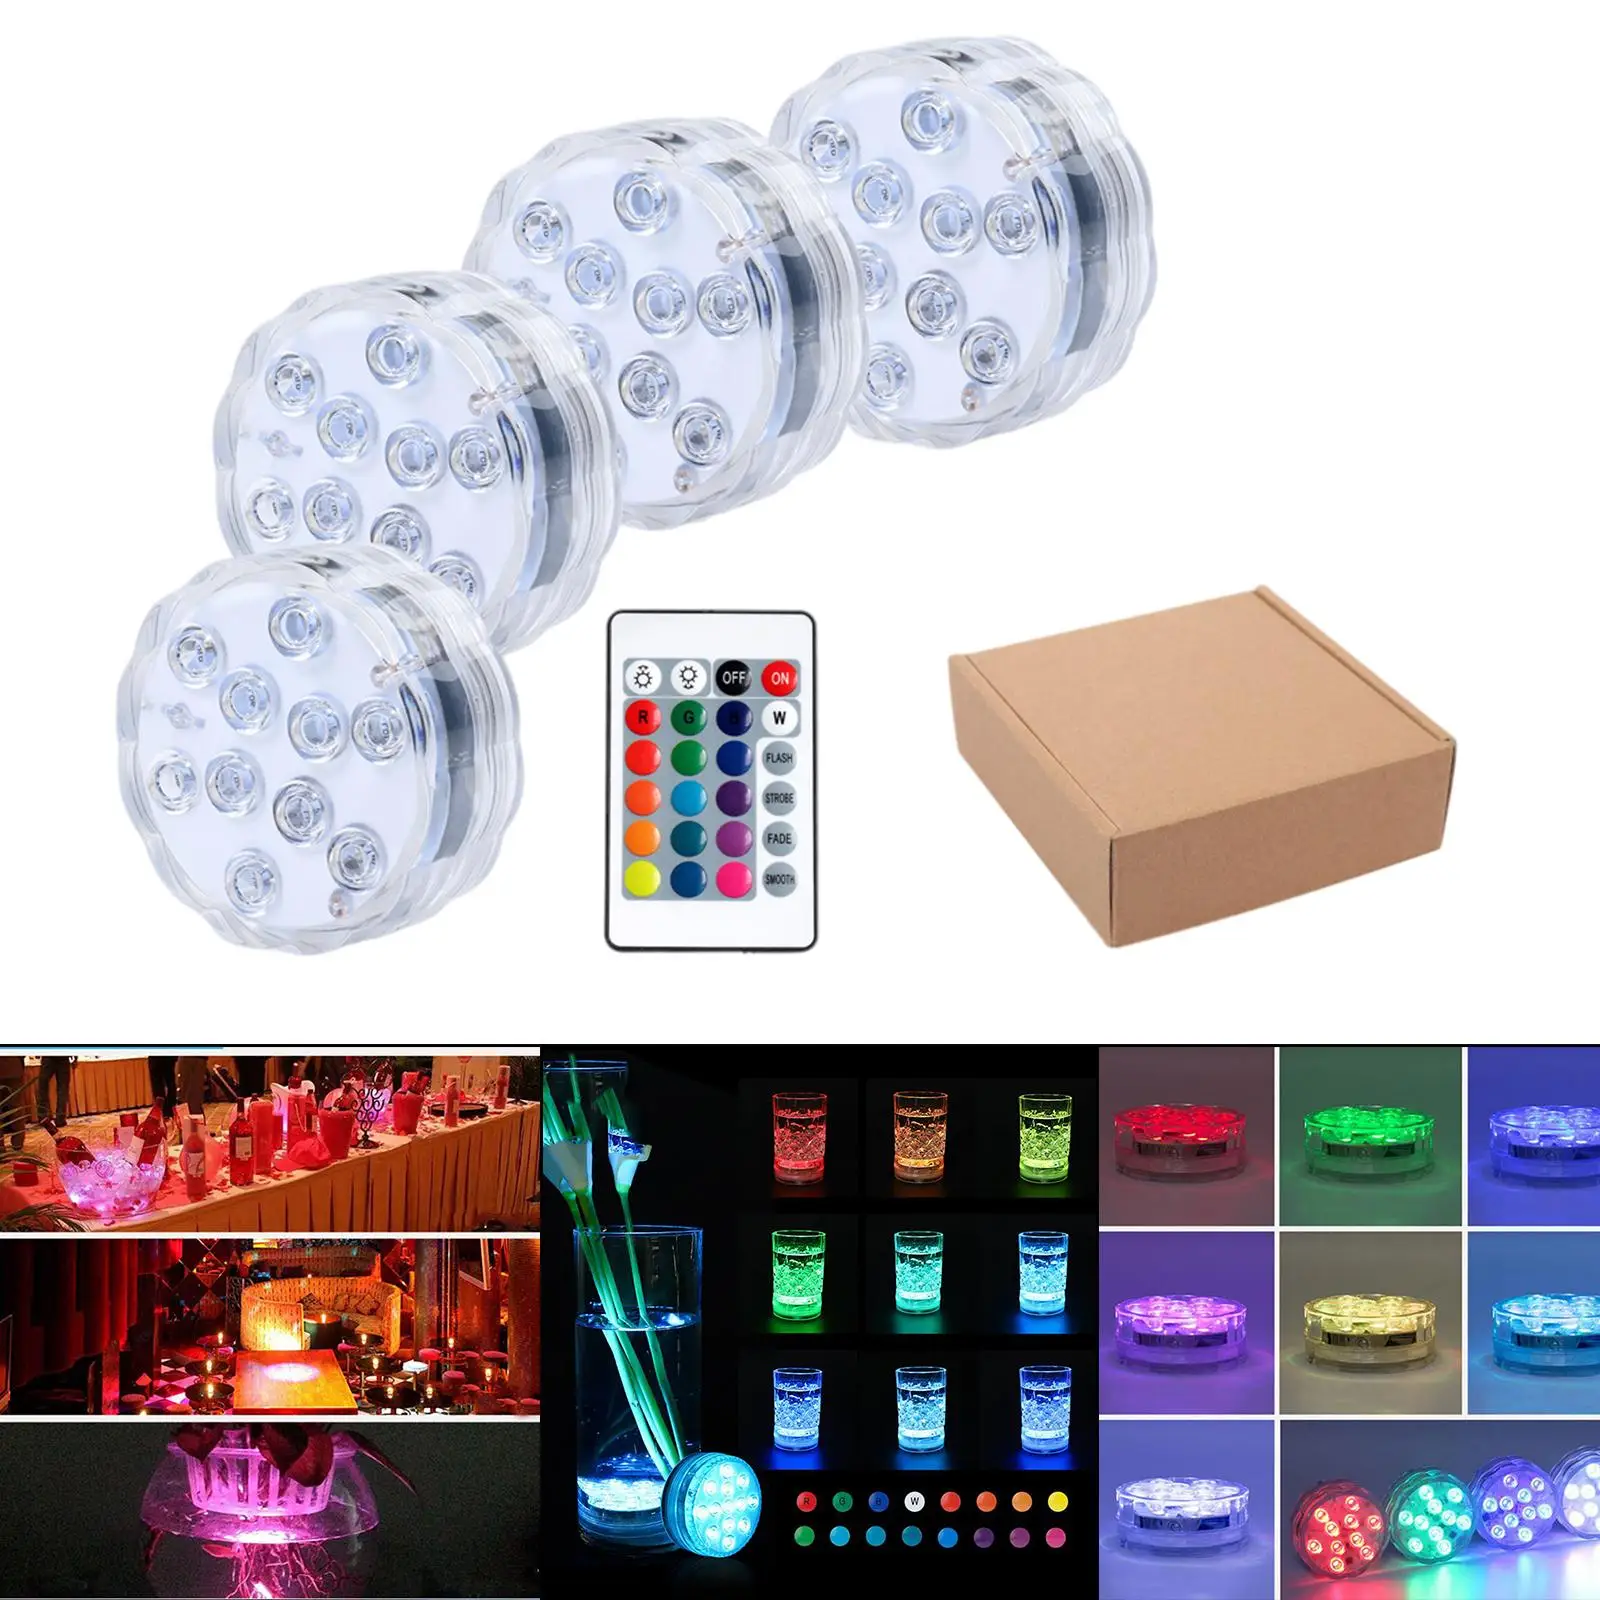 10 RGB Submersible LED Lights Pools Pond  Lights with Suction Cup